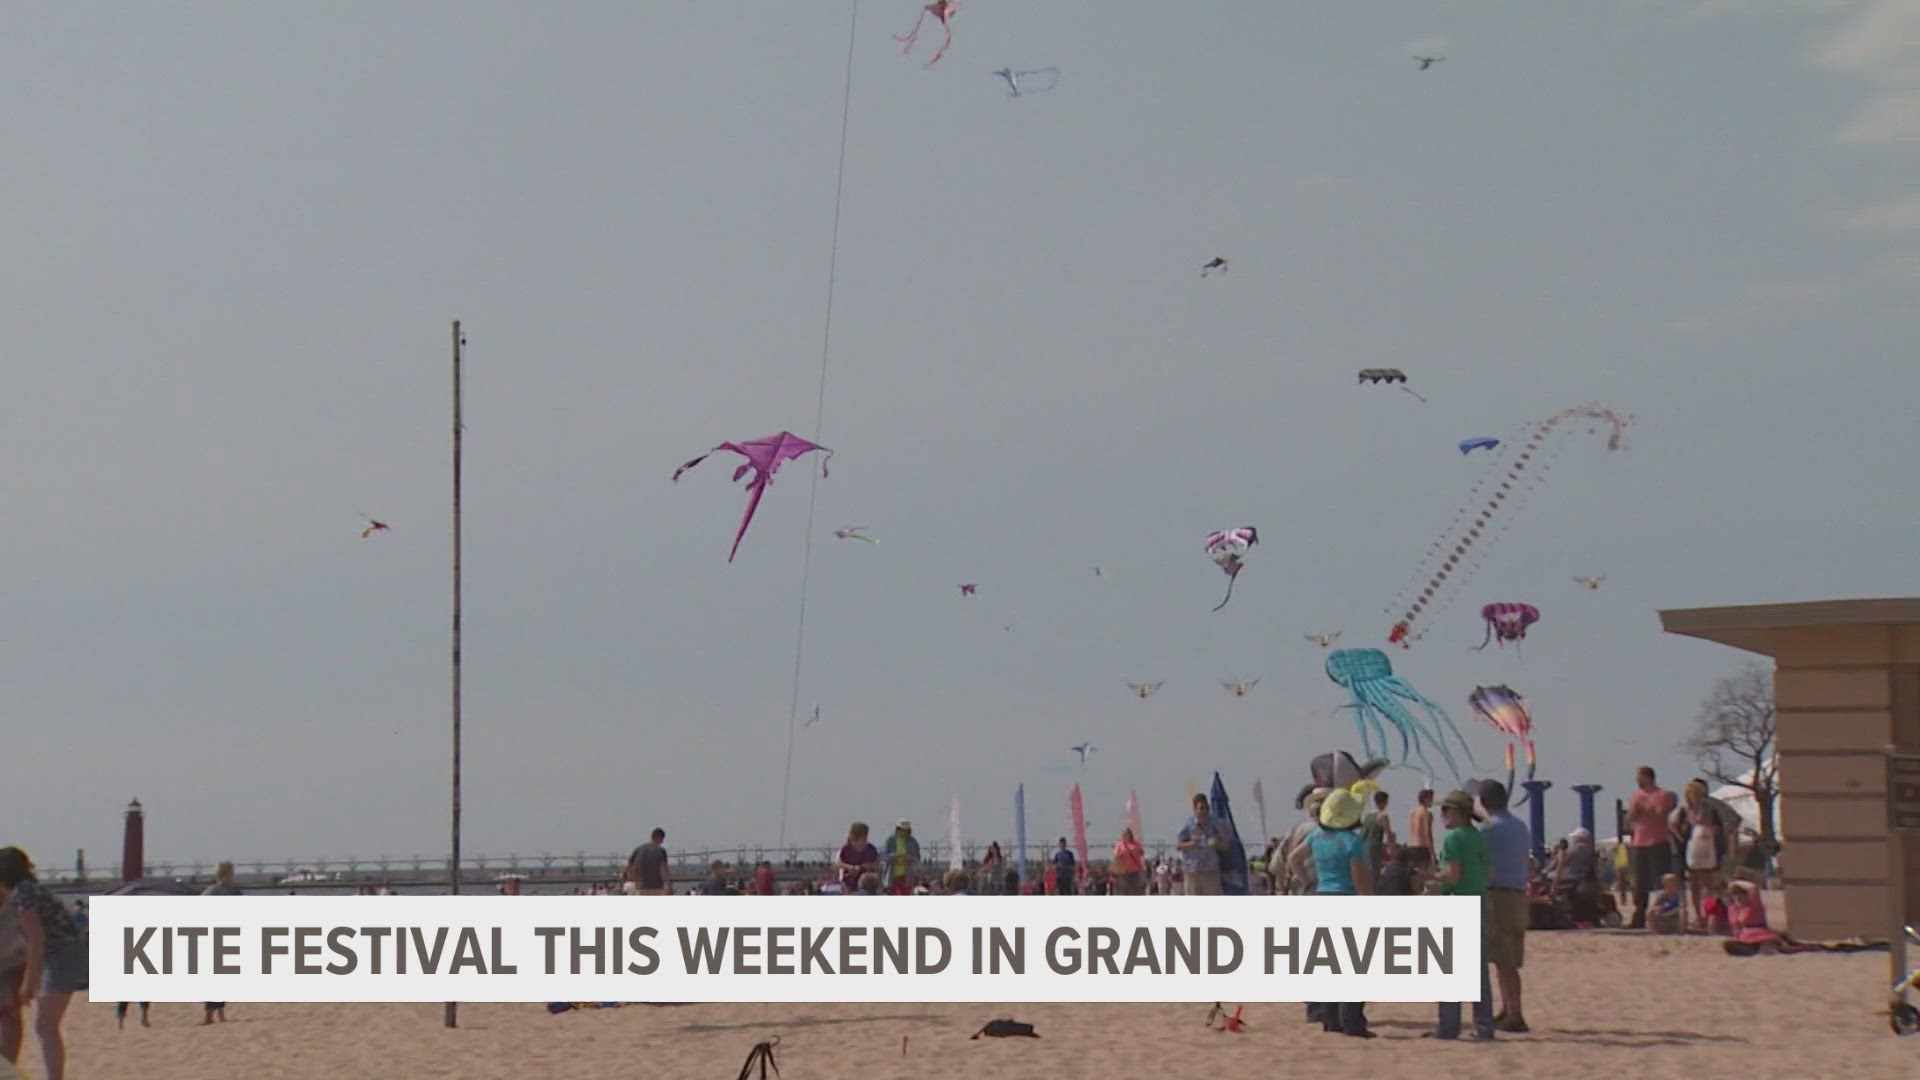 The event first began in the late 1980s, but has since evolved. The kite festival runs Saturday from 10 a.m. to 5 p.m., and Sunday from 11 a.m. to 5 p.m.